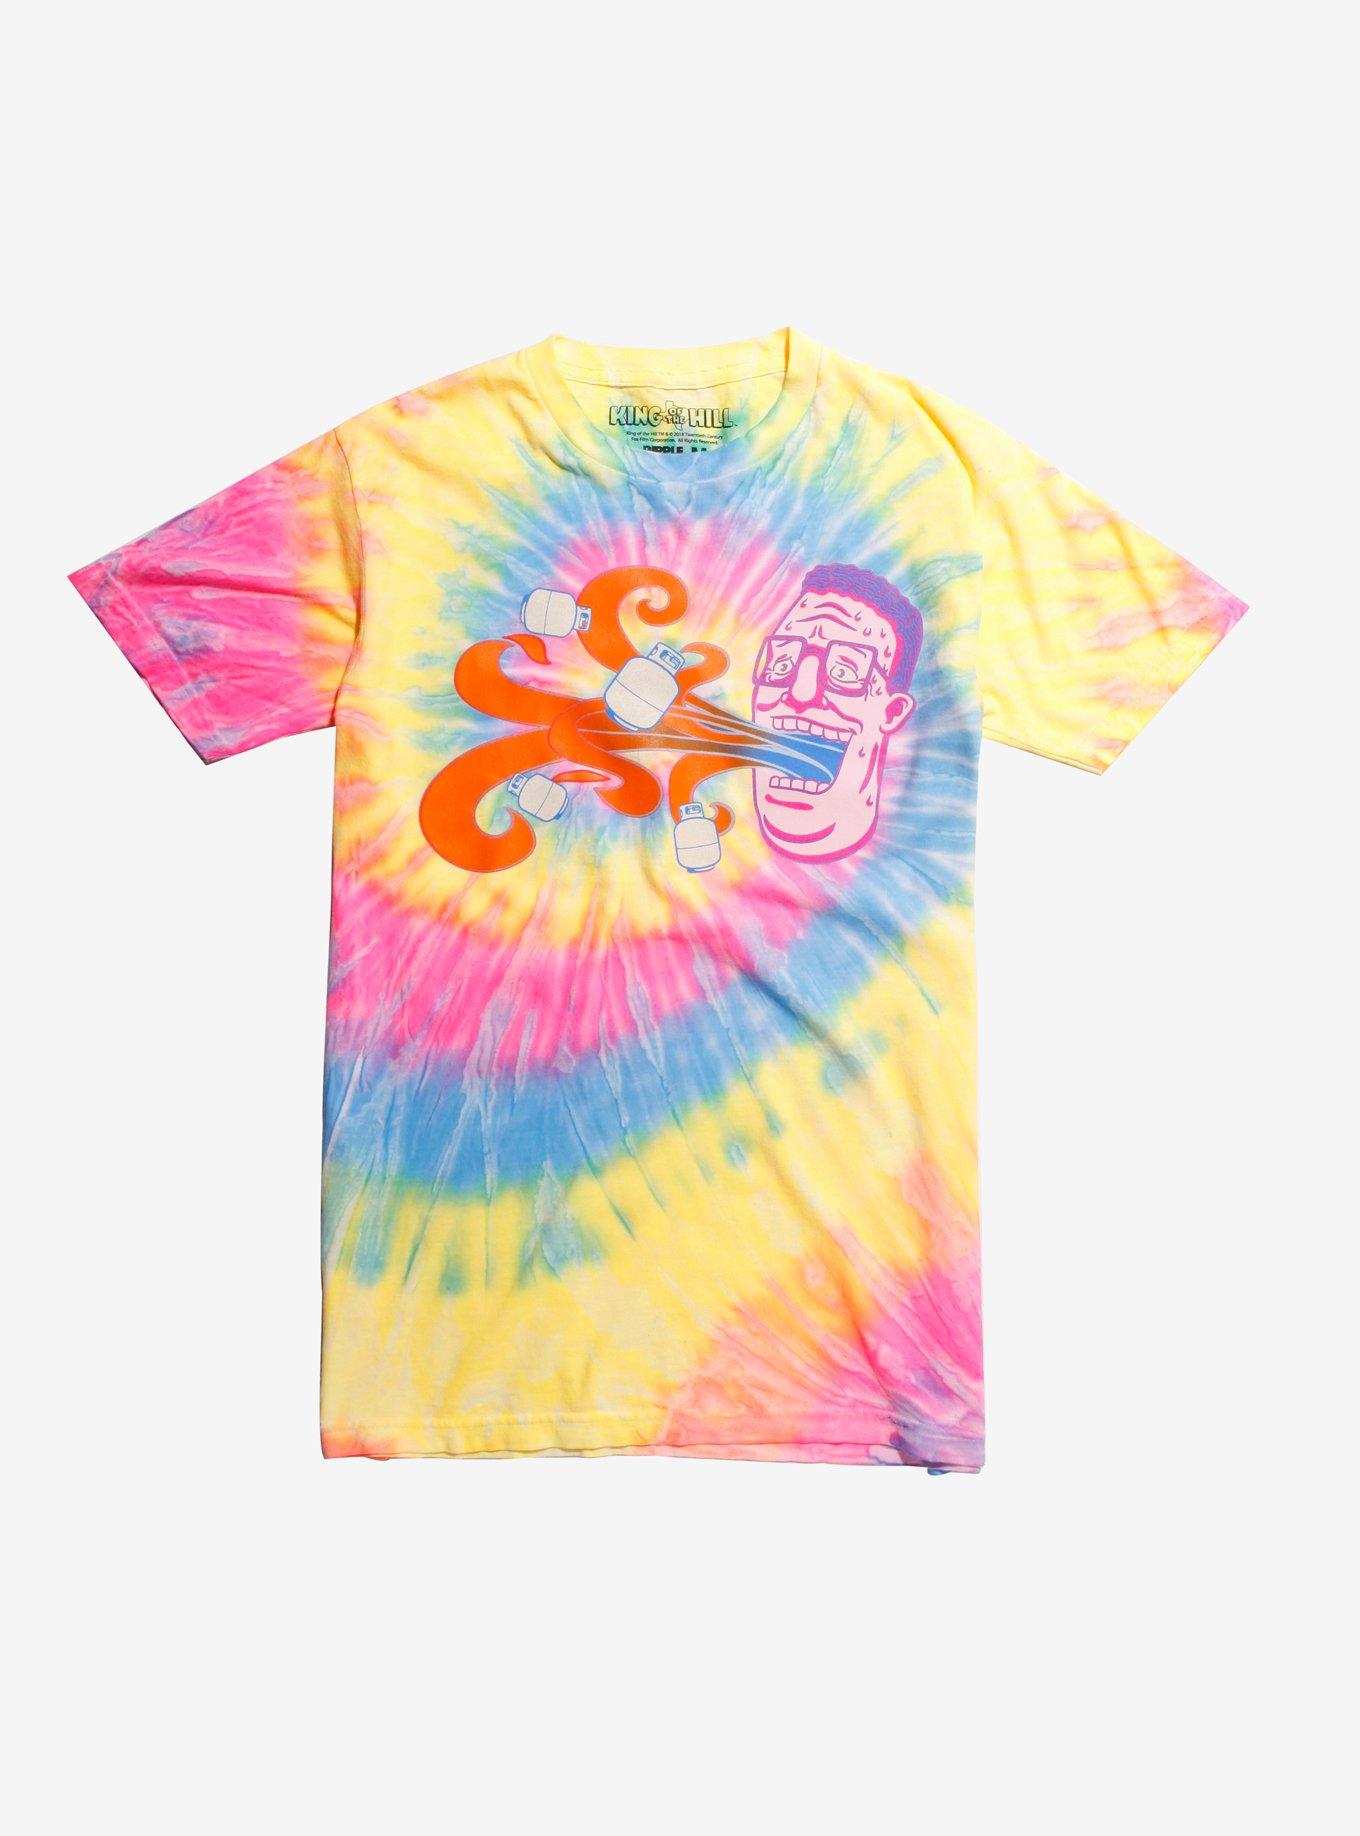 King Of The Hill Hank Tie-Dye T-Shirt Hot Topic Exclusive | Hot Topic